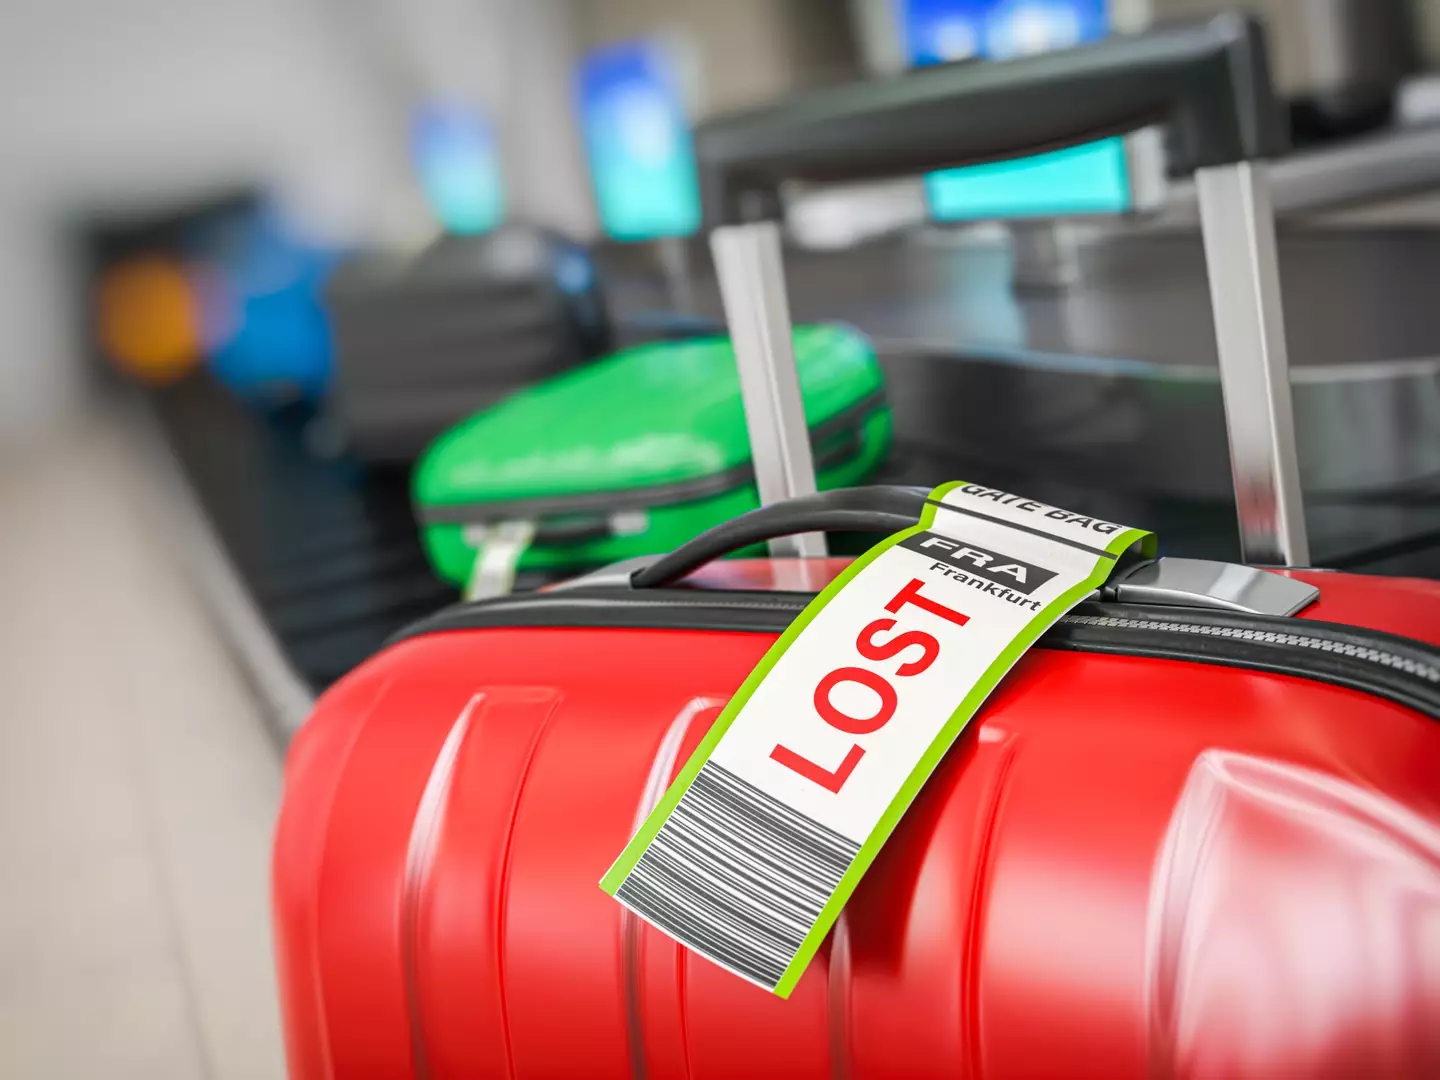 Airlines send lost luggage off to auction if they can't find the owner.